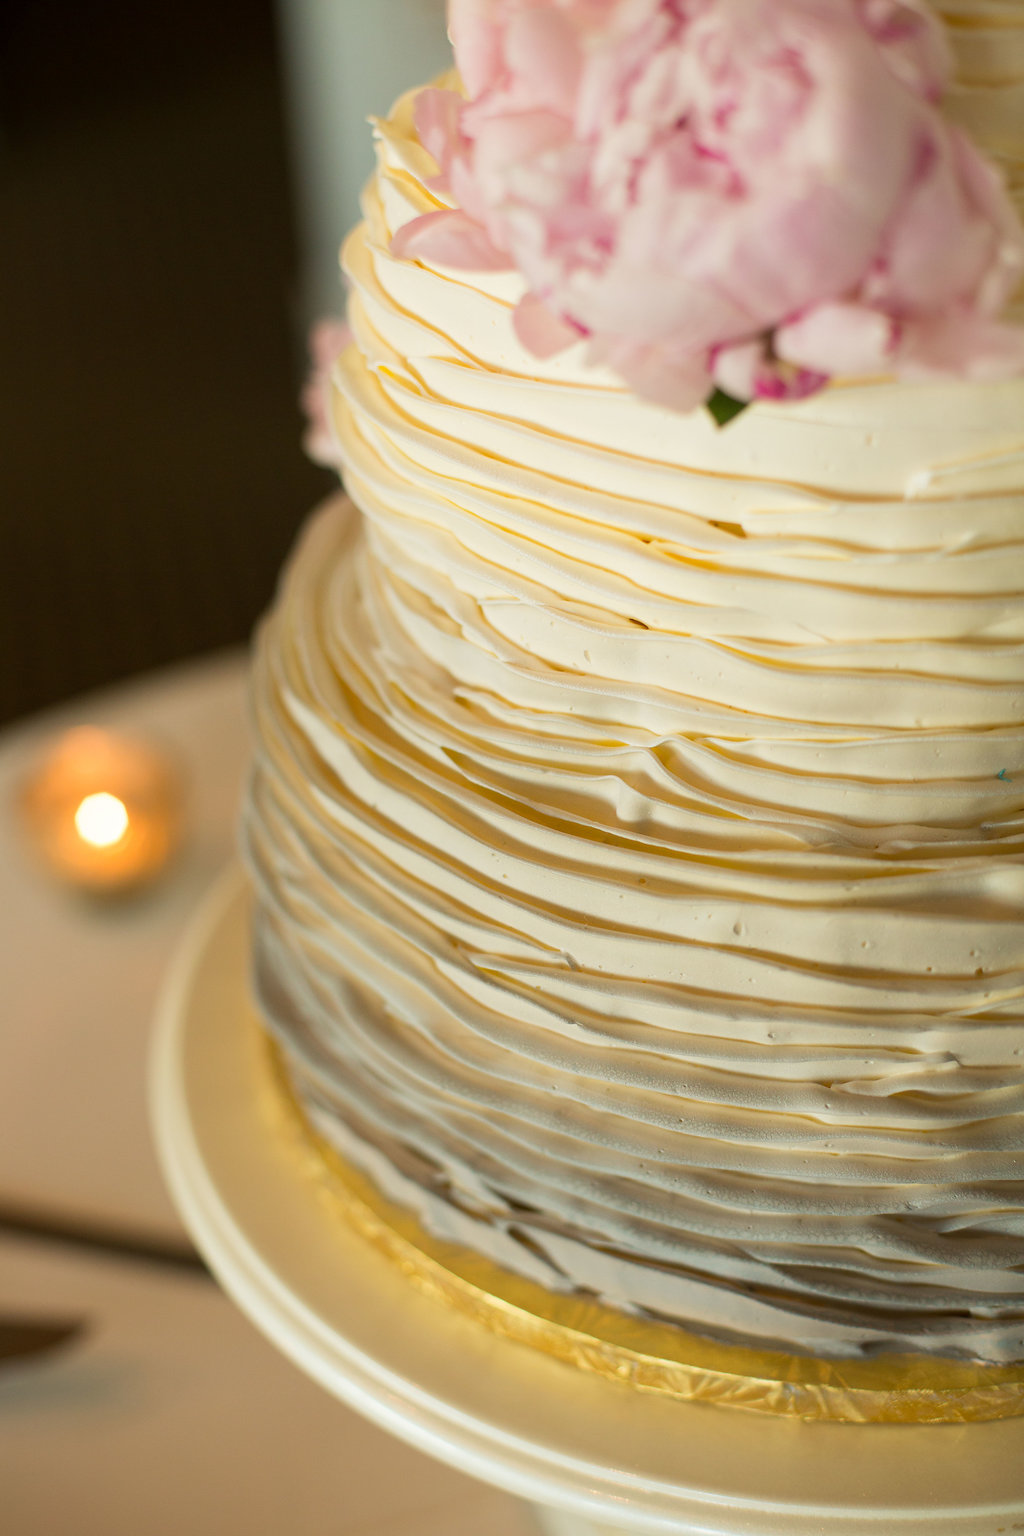 Three Tier Gold and White Icing Round Wedding Cake With Gray Ombre on White Cake Stand with Pink Peony Florals | Tampa Bay Wedding Bakery The Artistic Whisk